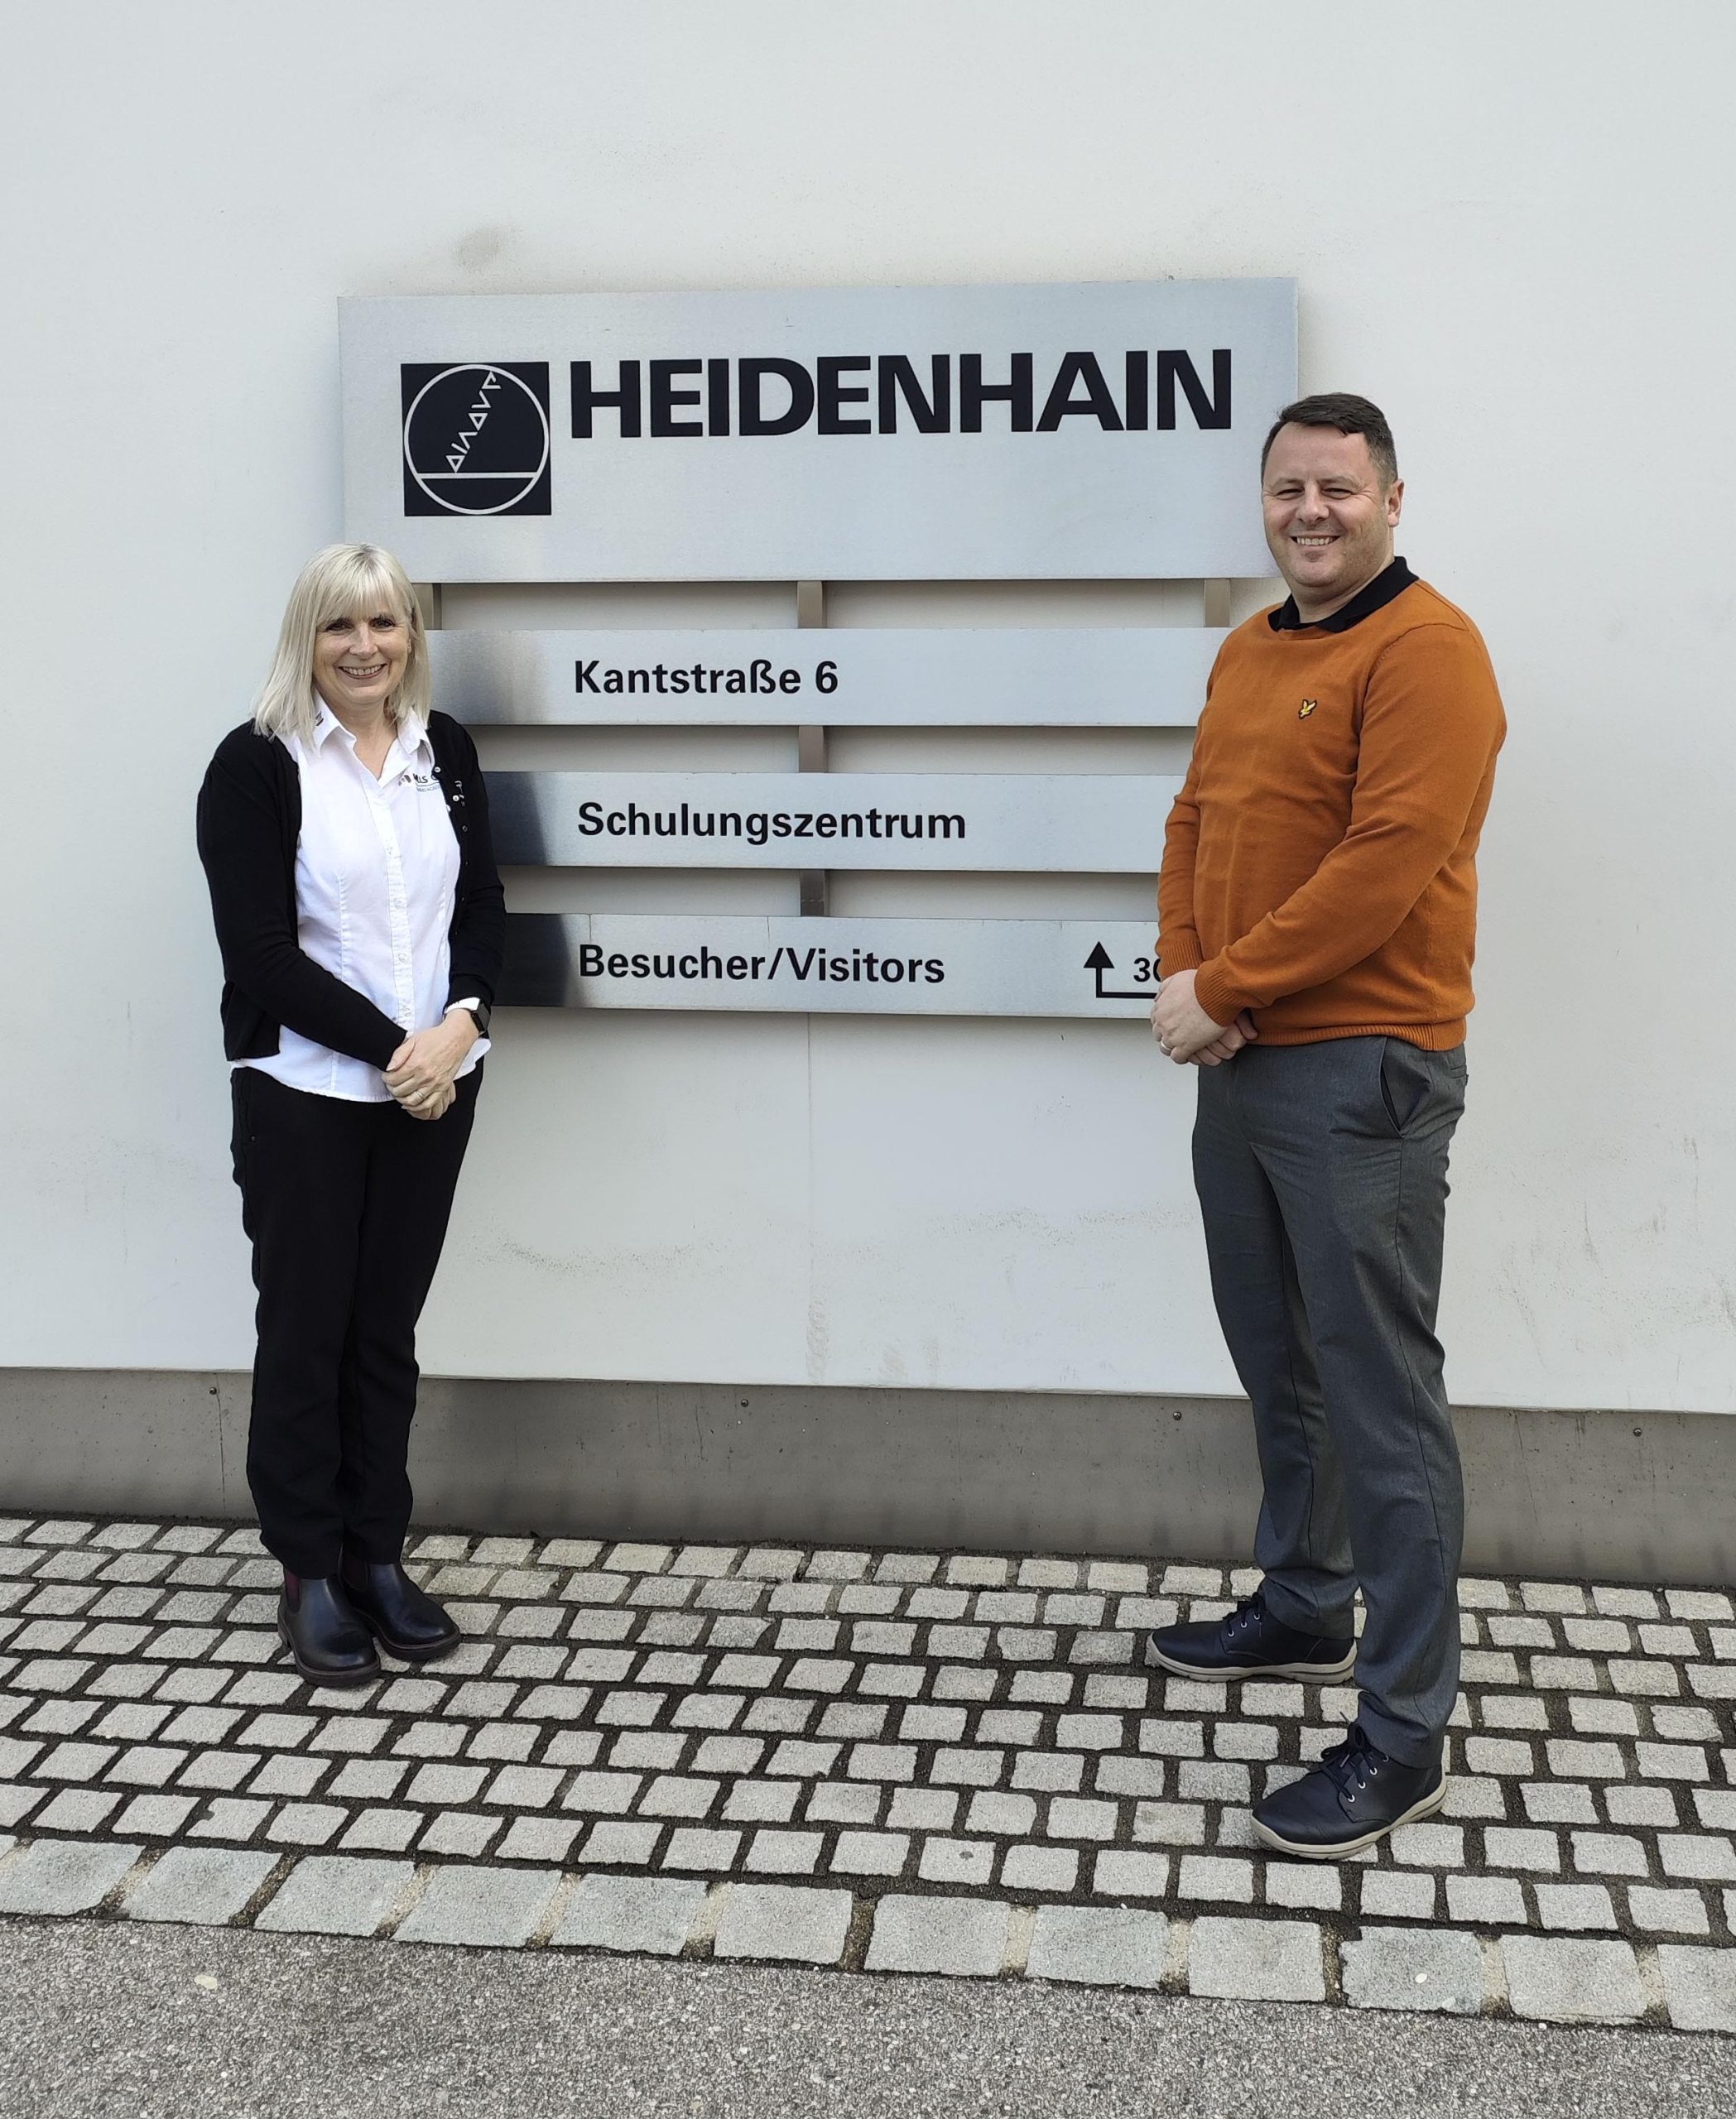 Mills CNC Training Academy Manager Karen Earley and Trainer Darren Clarke at the  Heidenhain facility in Traunreut, Germany